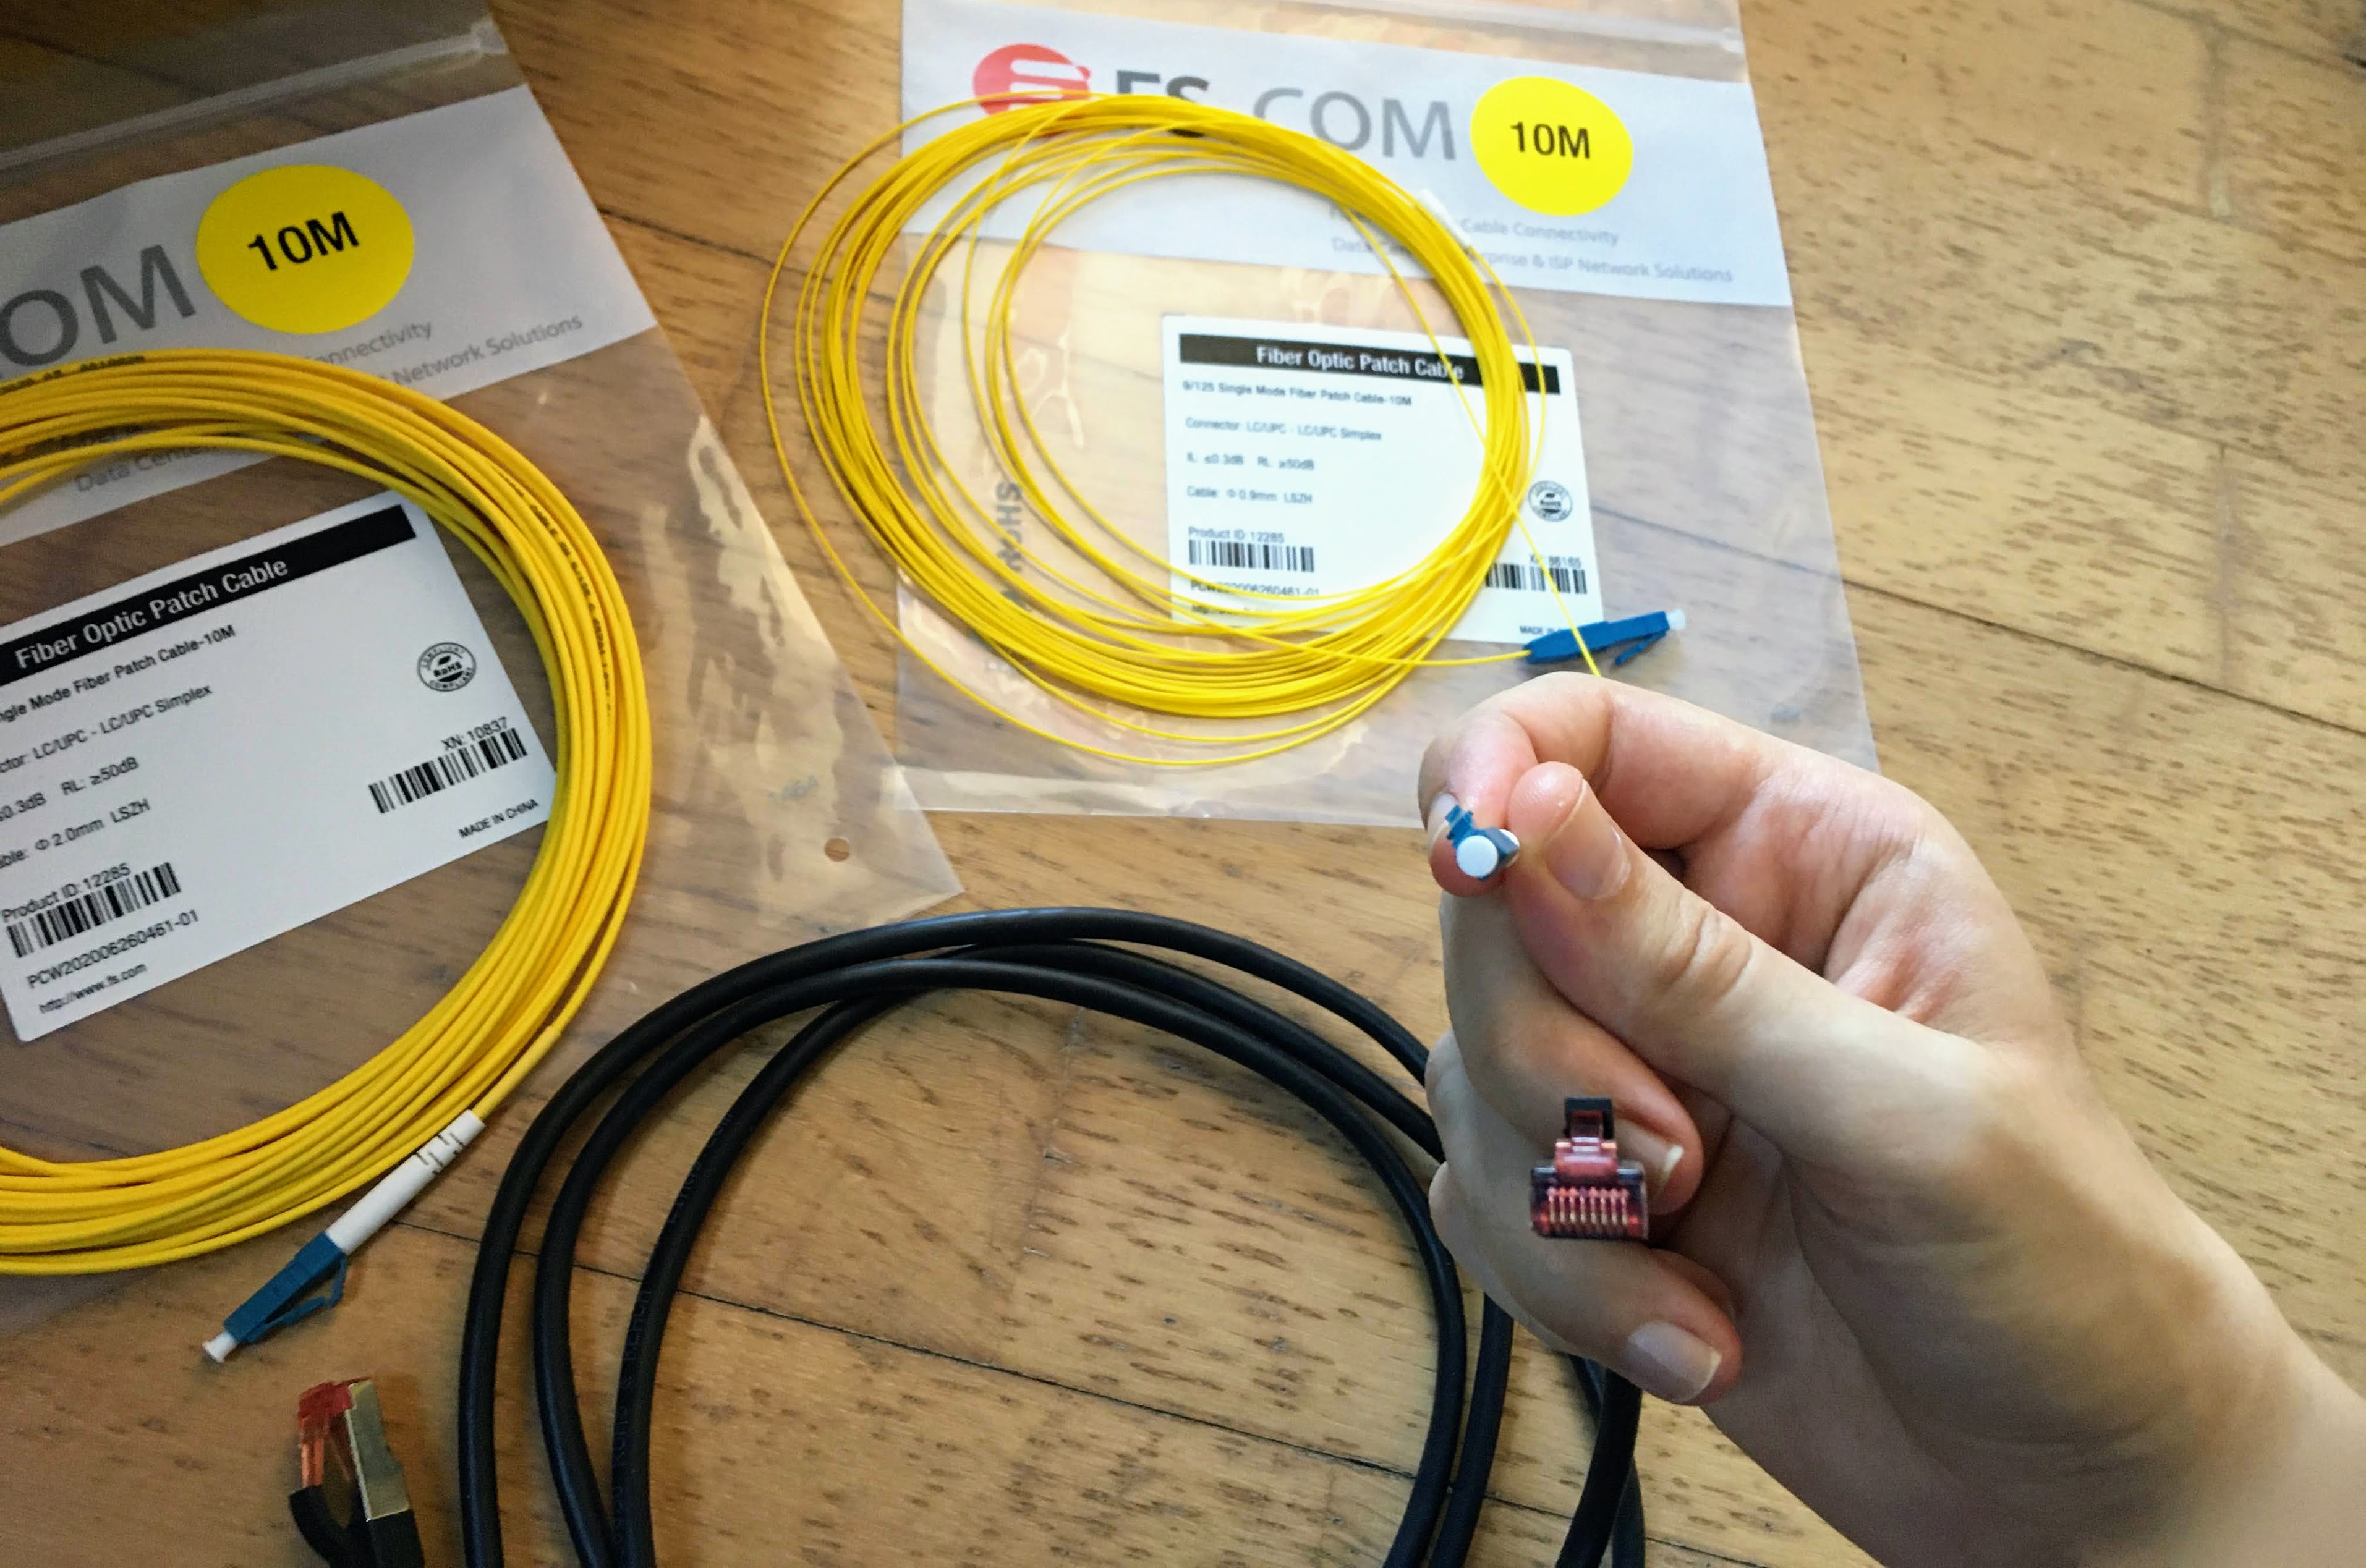 https://michael.stapelberg.ch/posts/2020-08-09-fiber-link-home-network/2020-08-07-fiber-cable-connector-size-featured.jpg